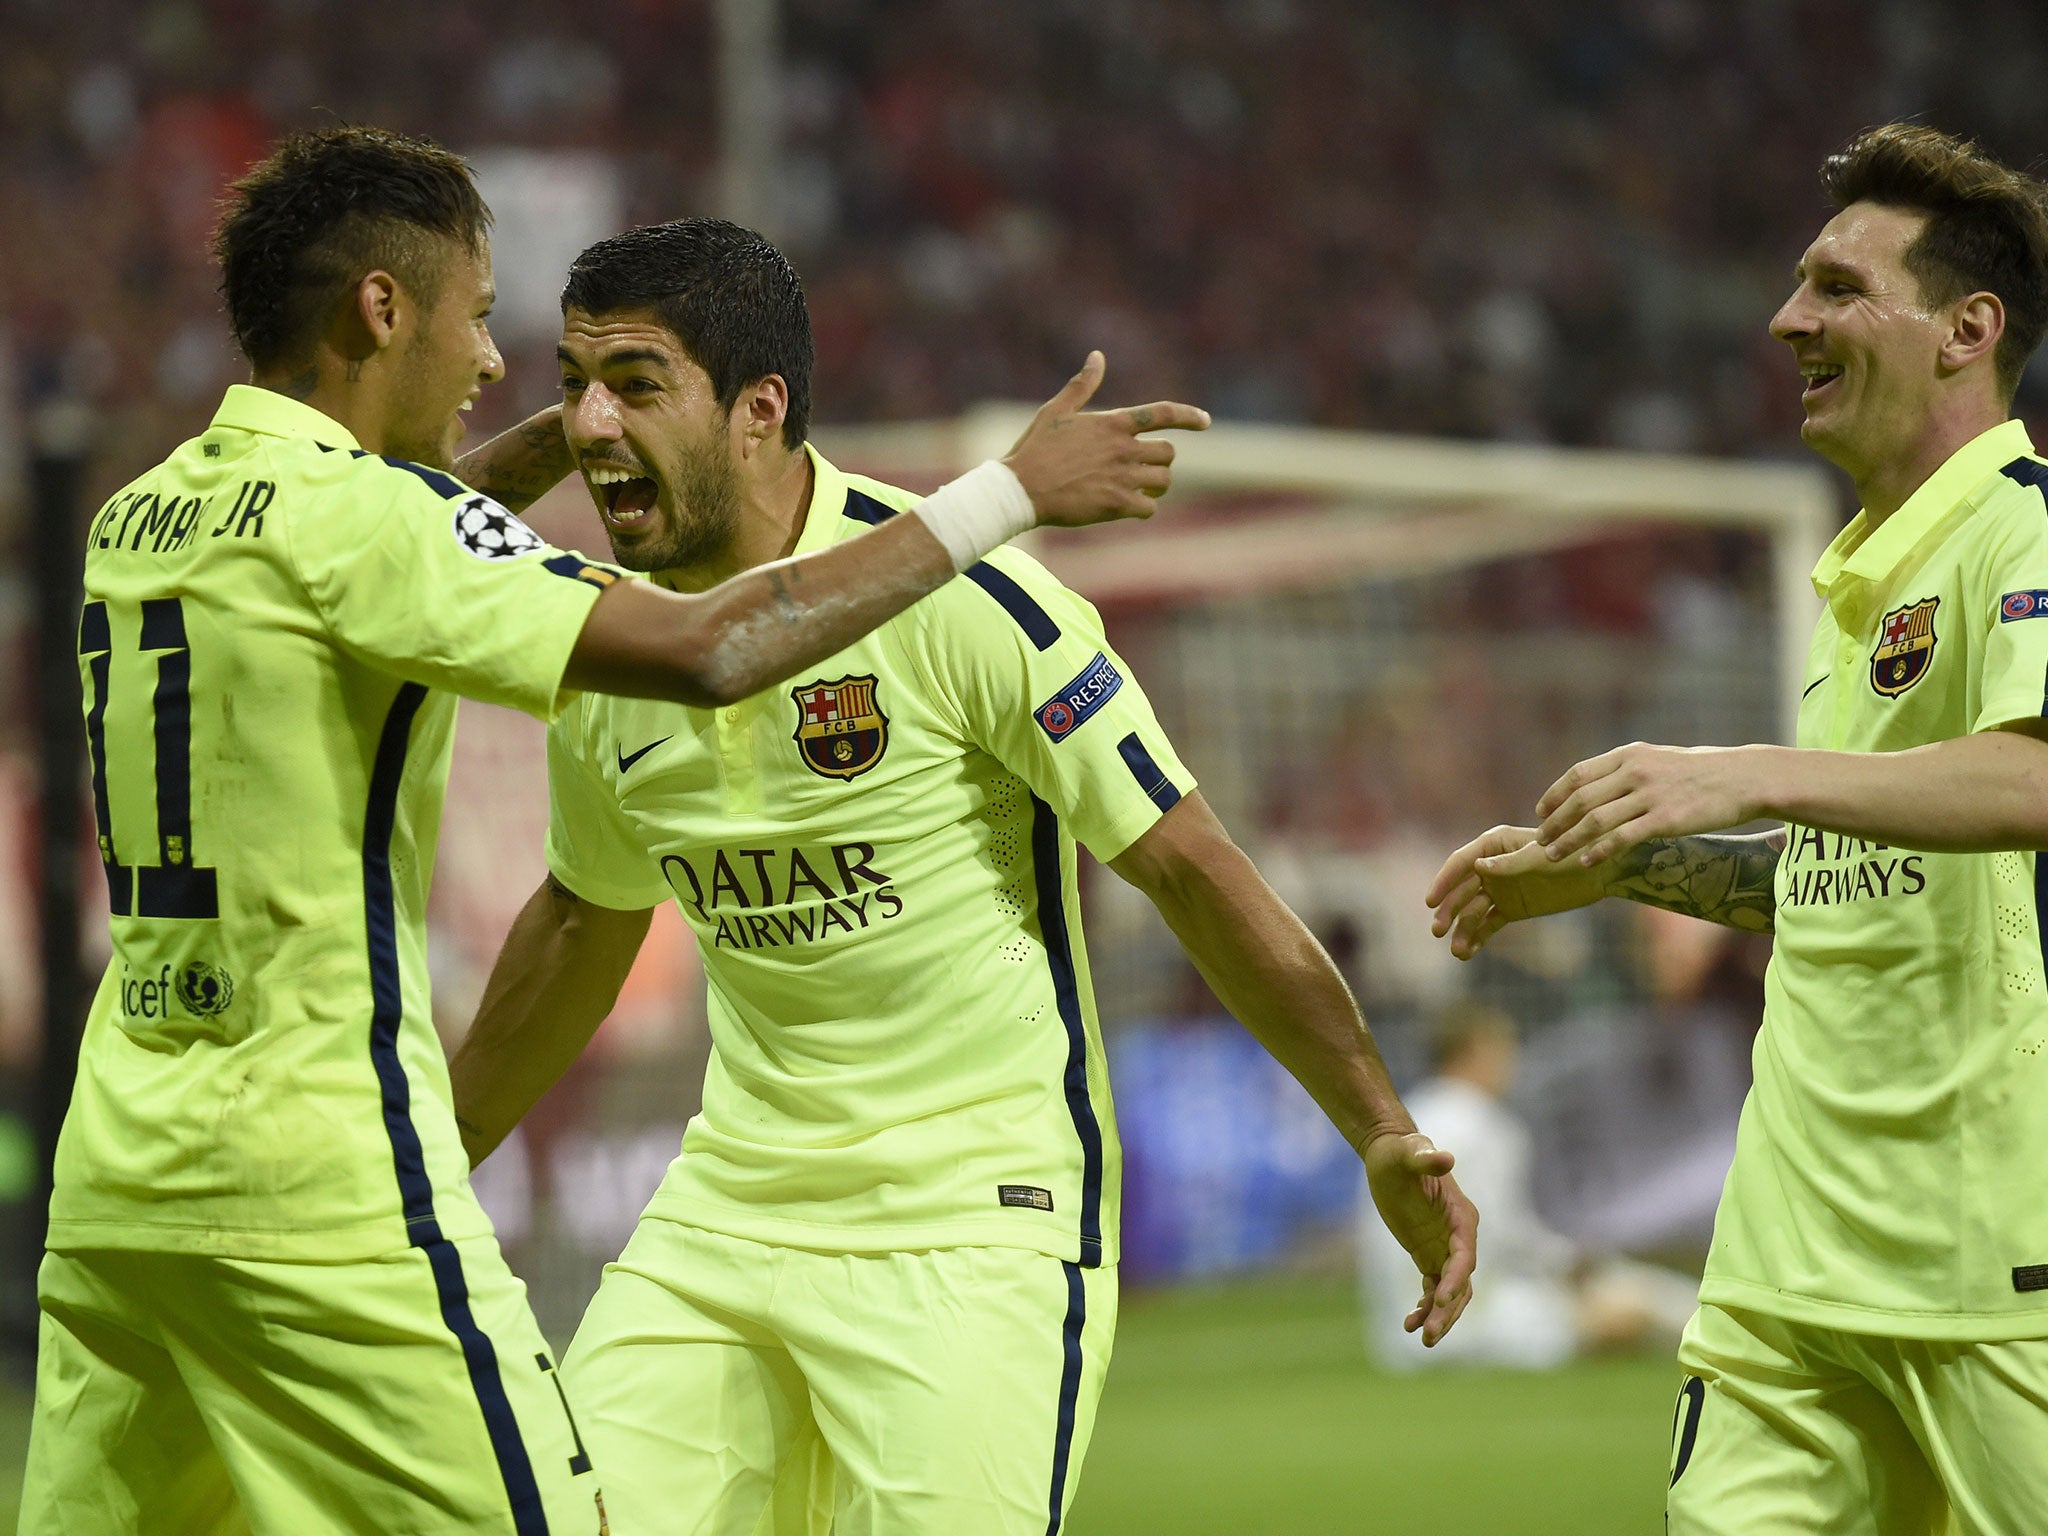 Luis Suarez and his exploits in a Barcelona shirt